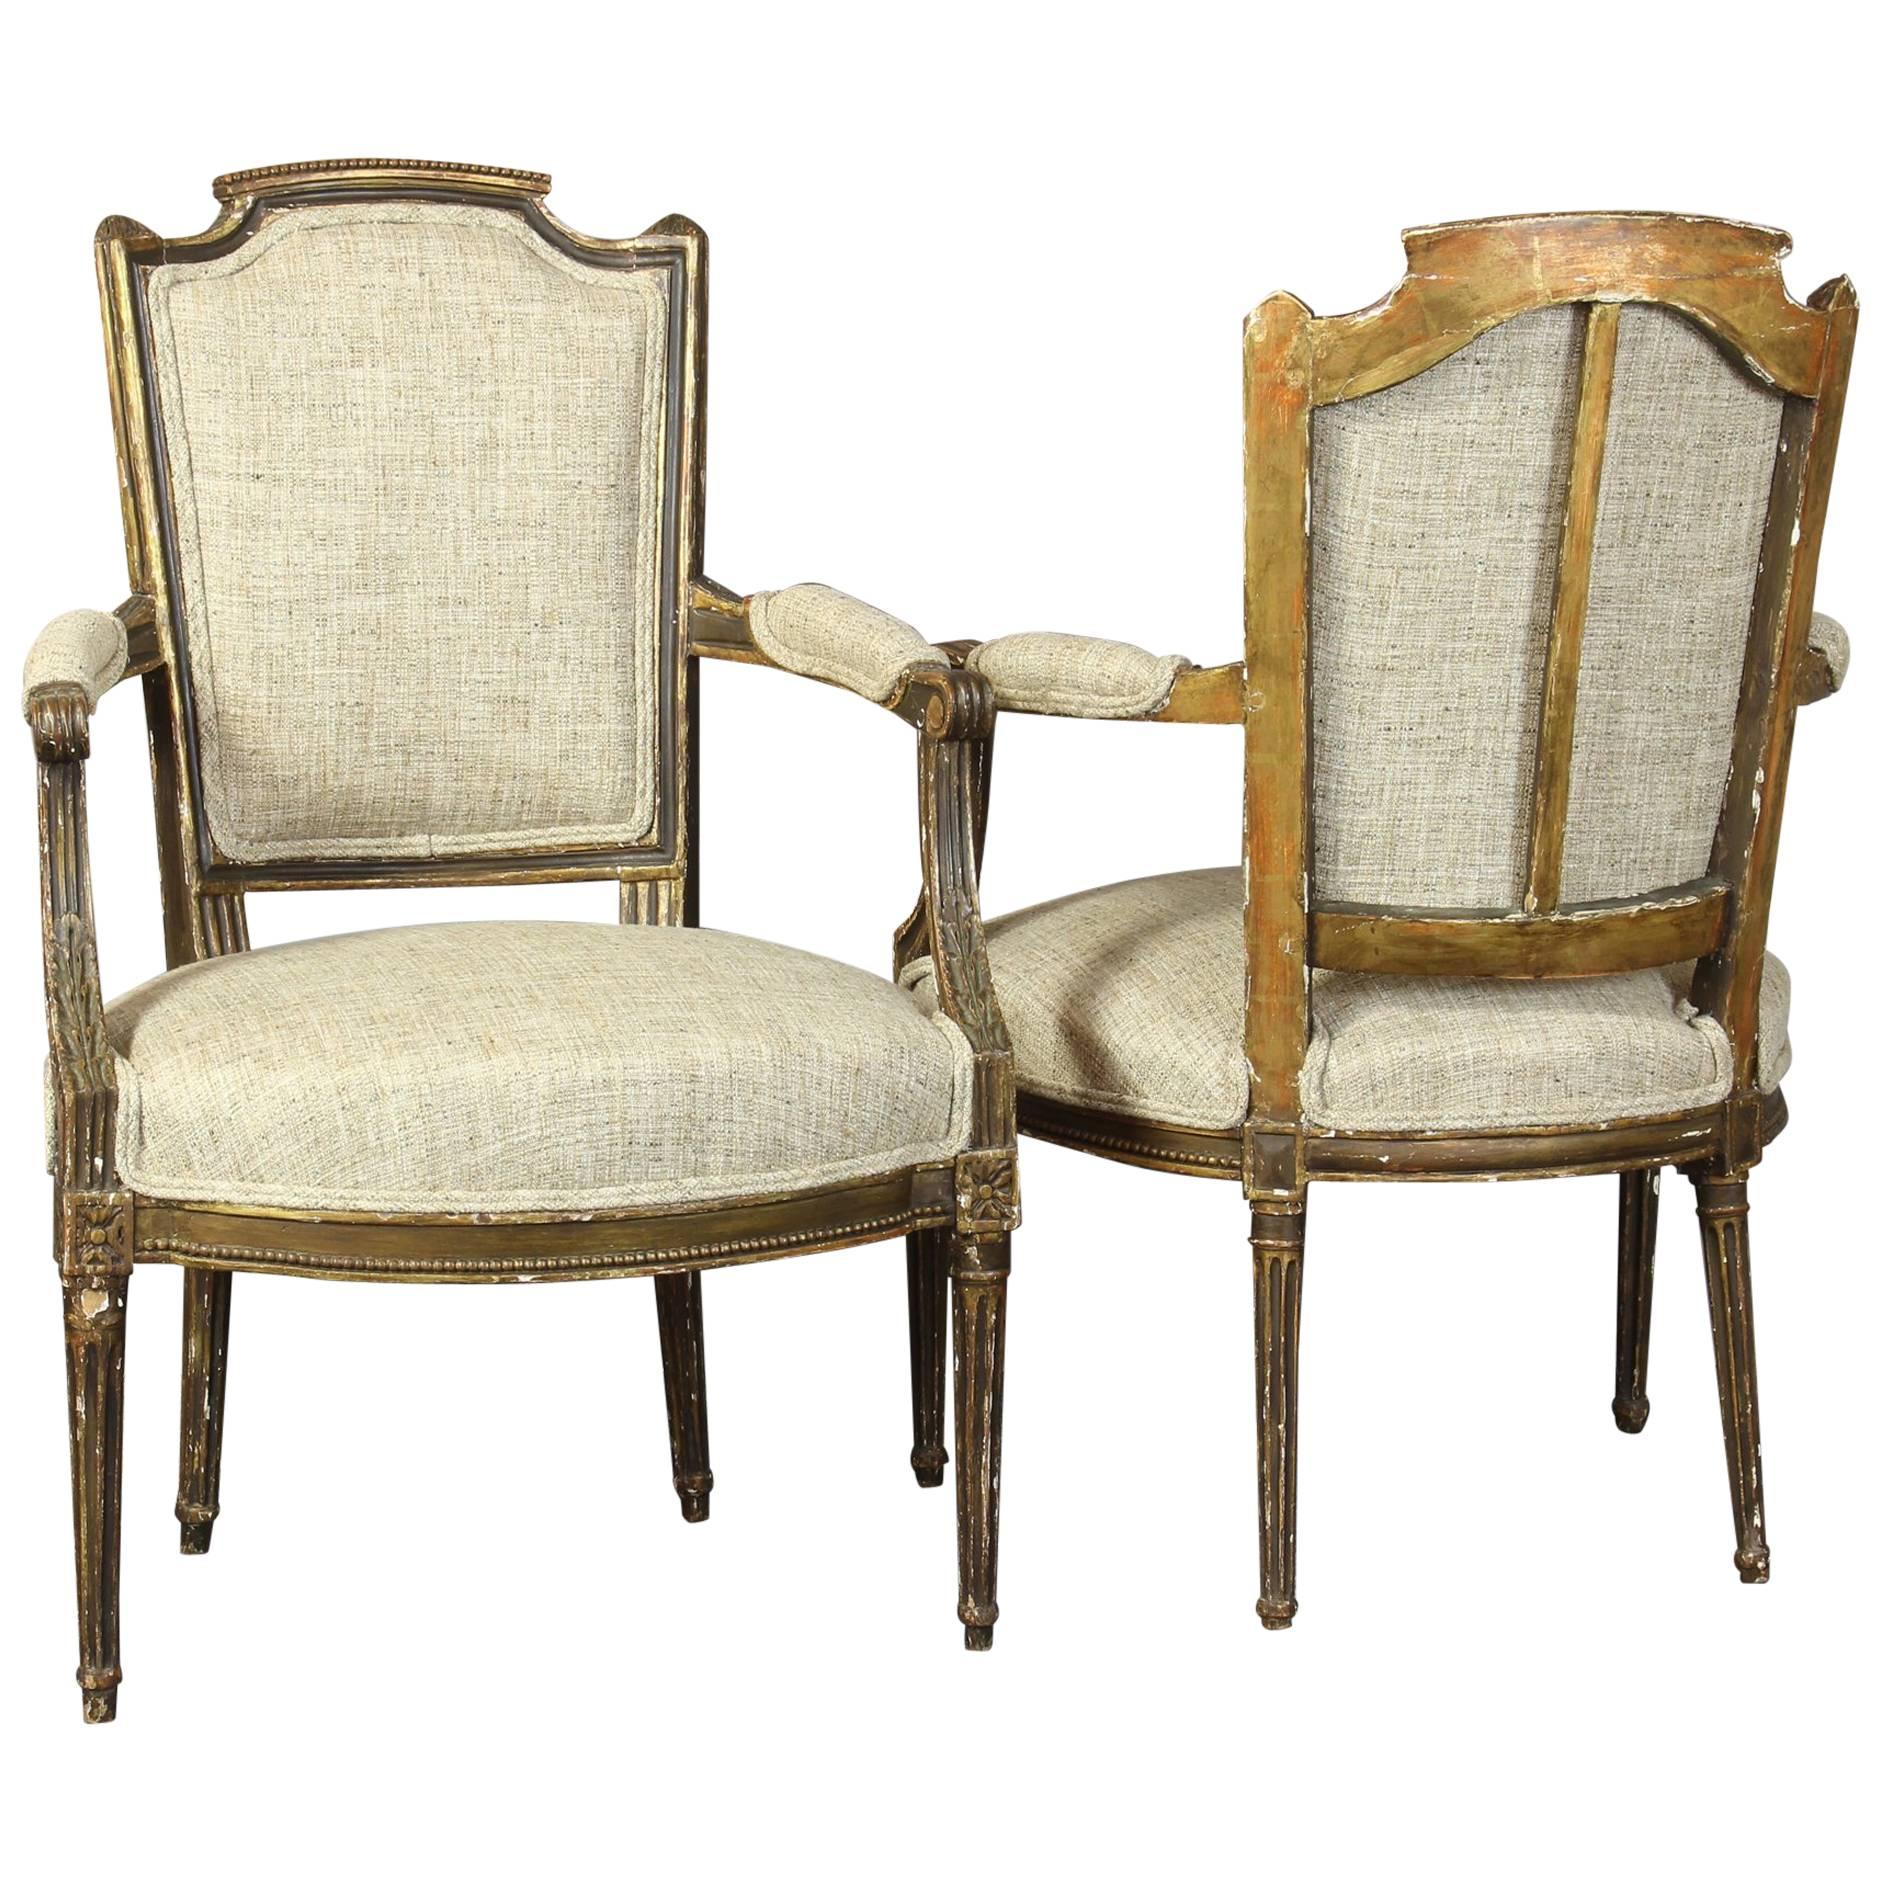 Pair of 18th Century French Fauteuils